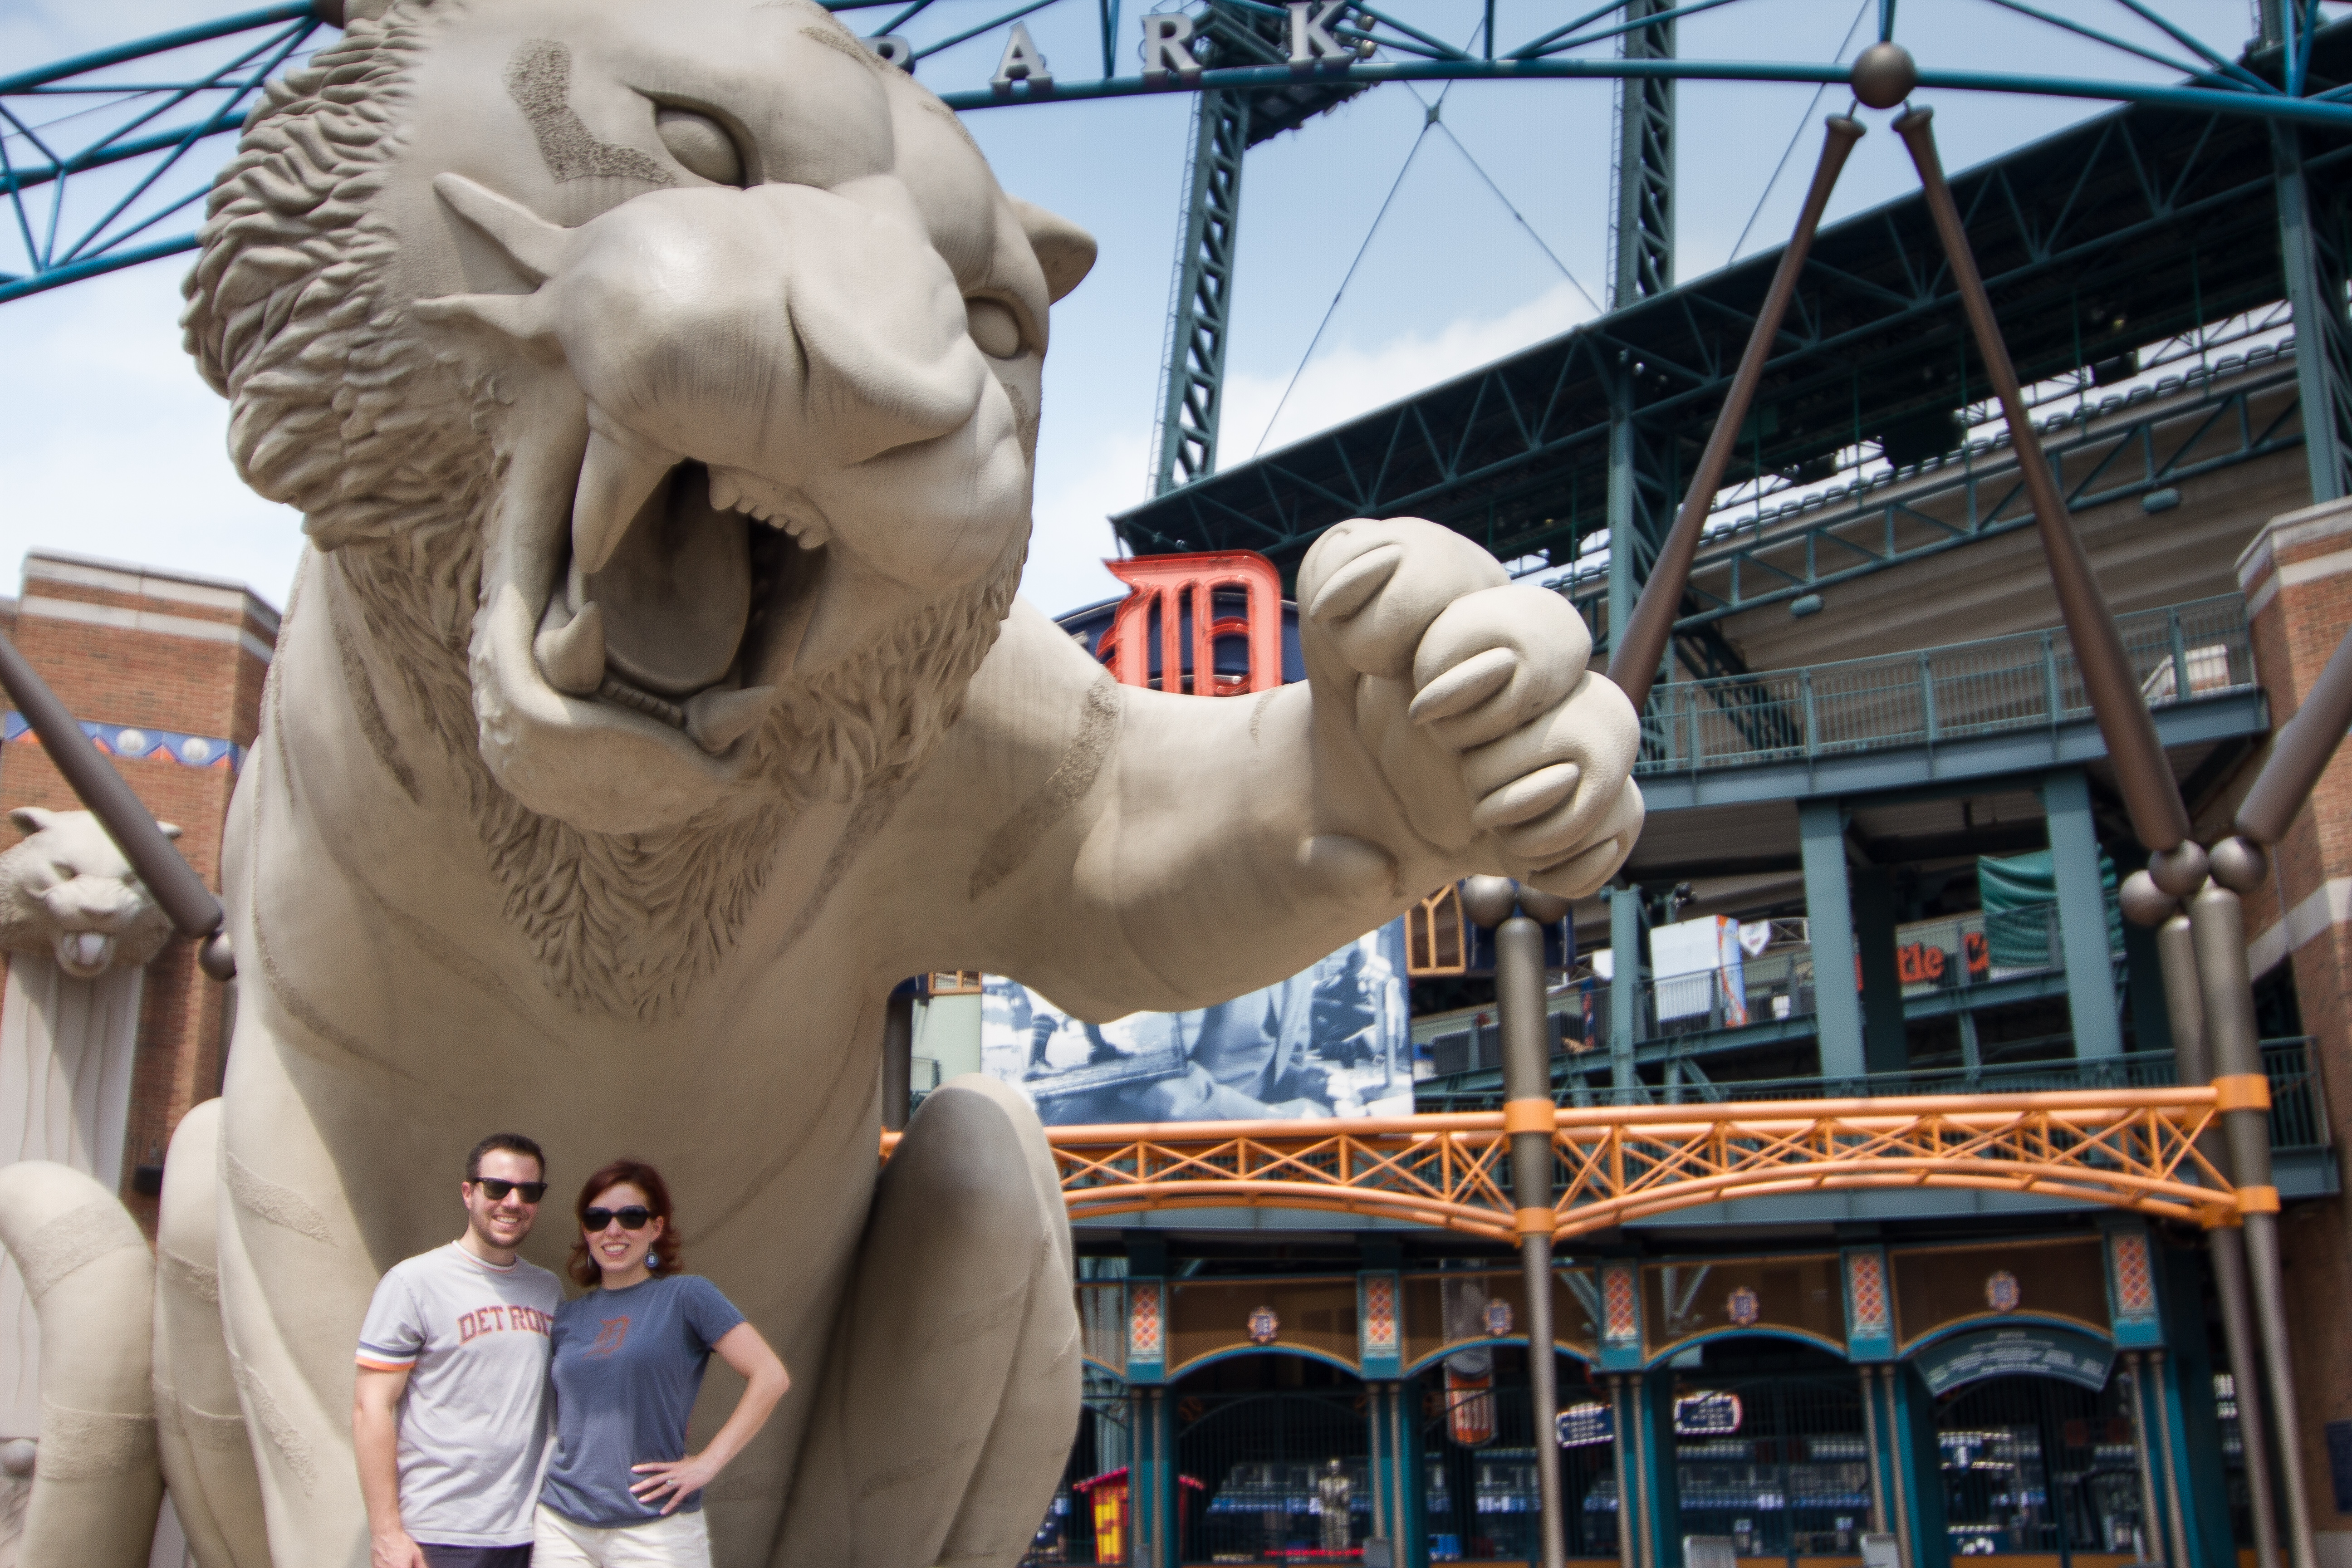 Melissa Demorest LeDuc and her husband Jeff, who will soon celebrate their 10th wedding anniversary, were introduced at a Detroit Tigers baseball game.